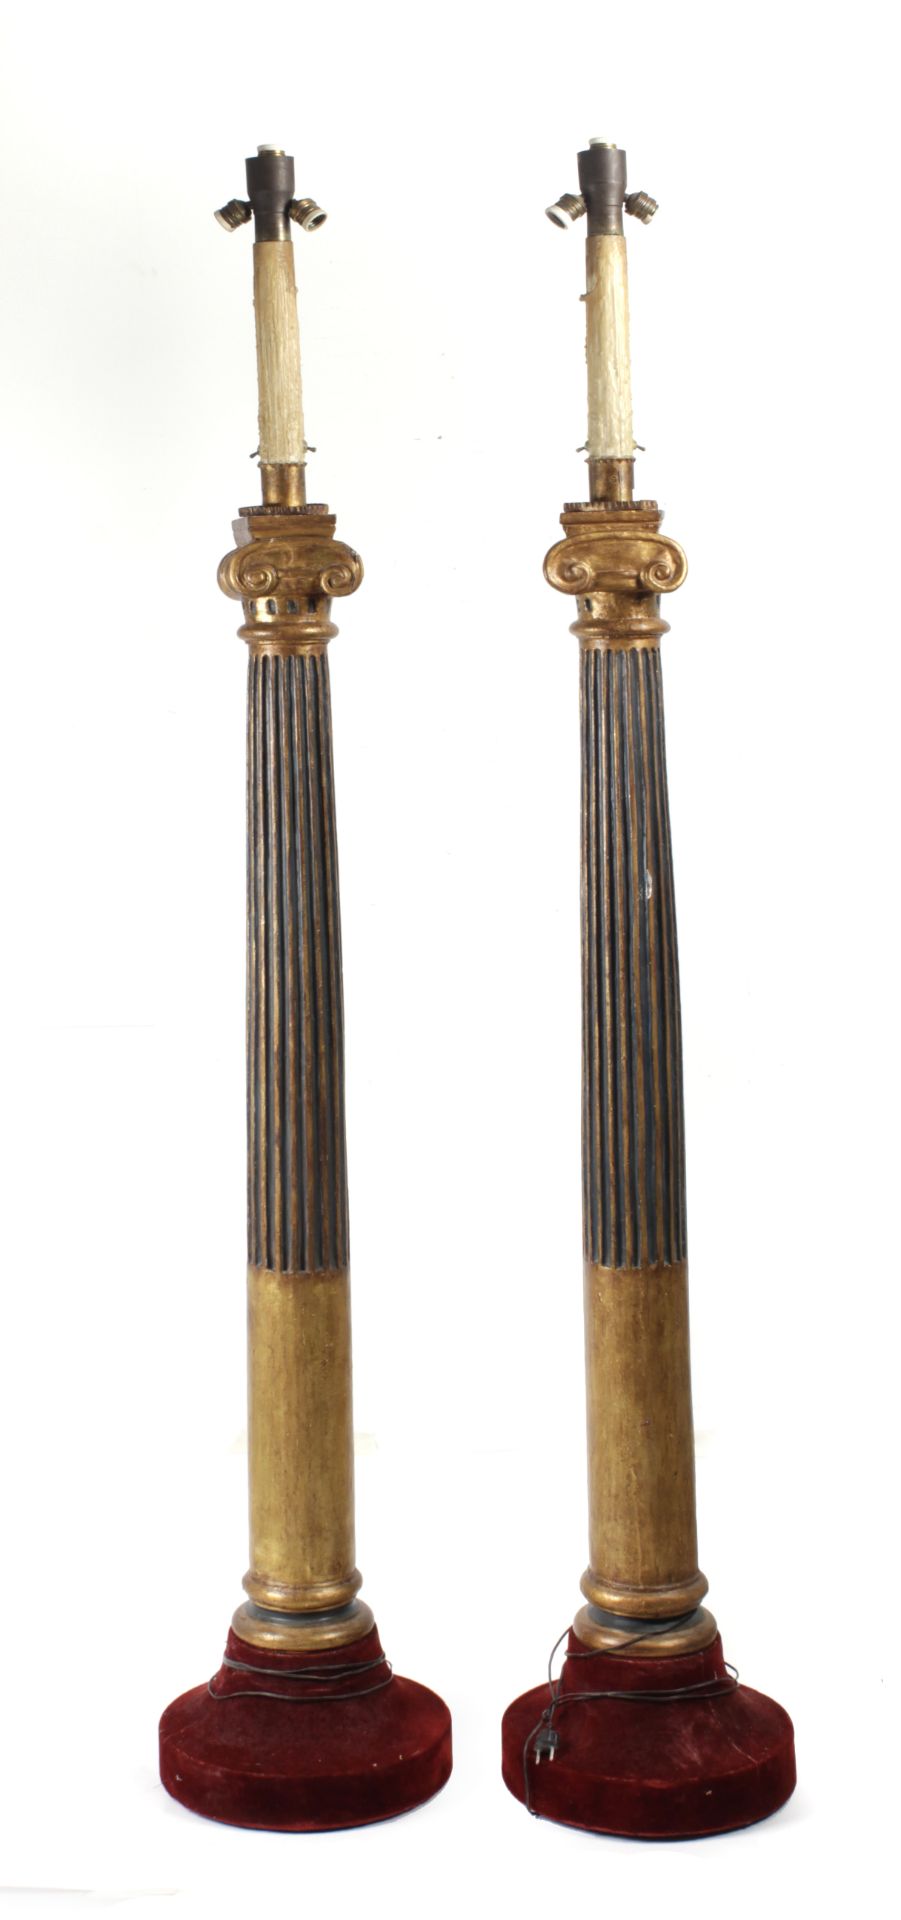 A pair of 18th century Neoclassical columns